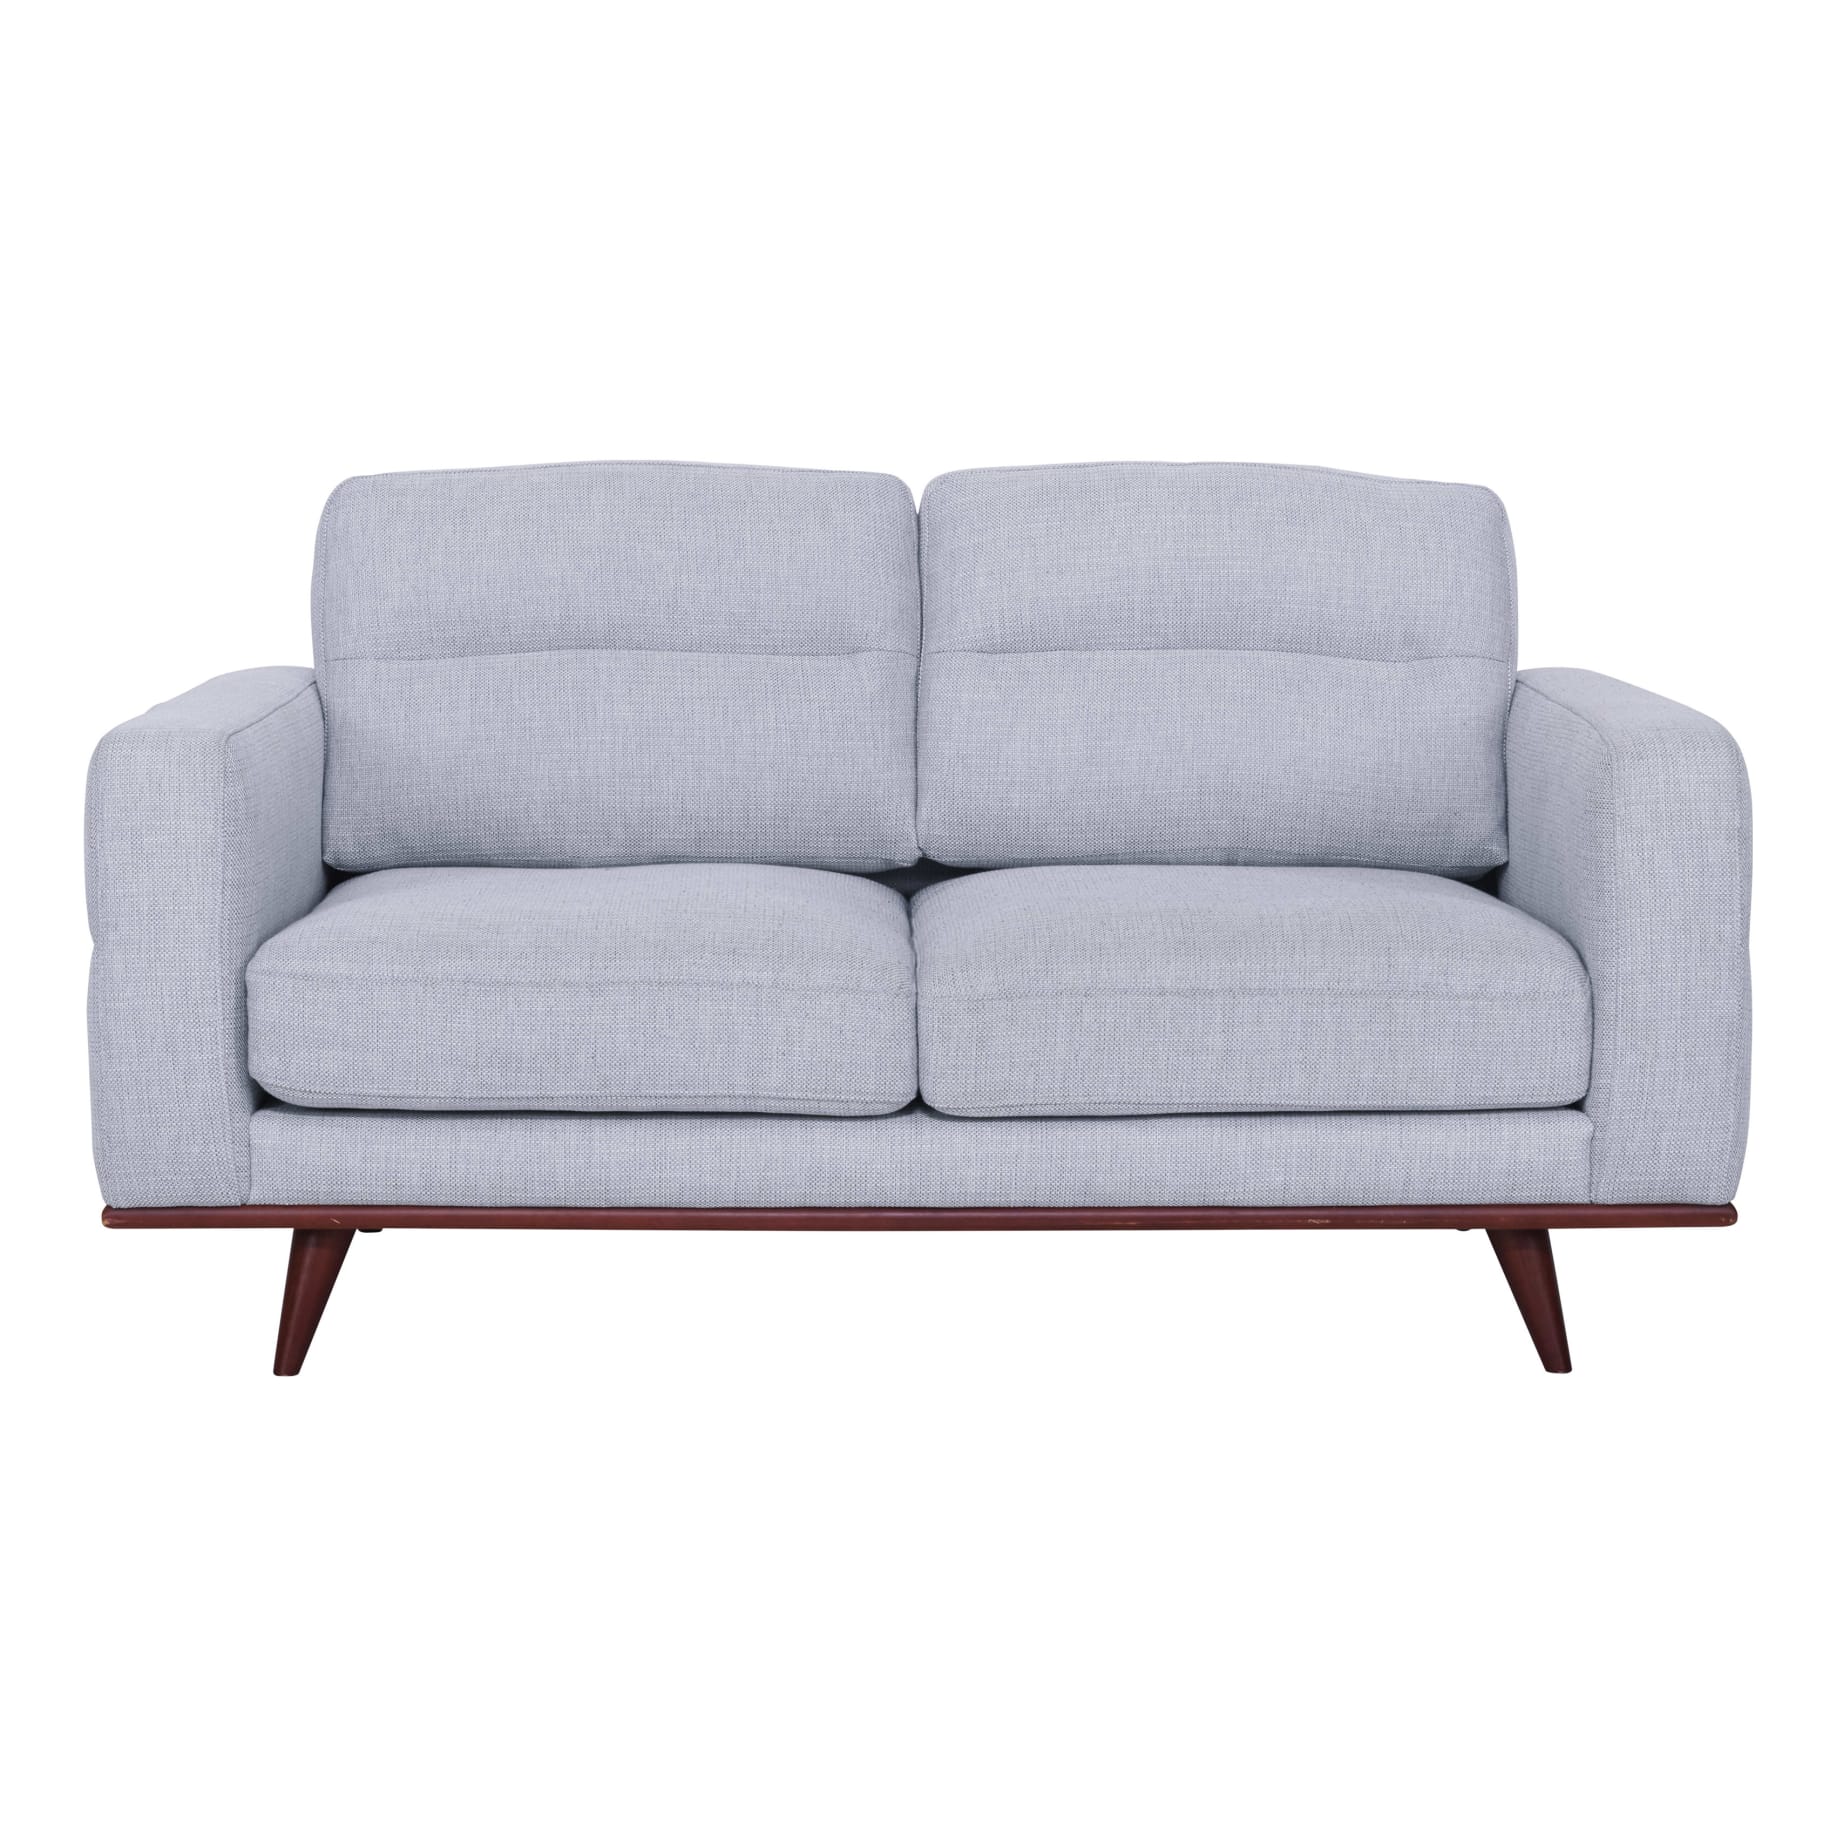 Astrid 2 Seater Sofa in Talent Silver